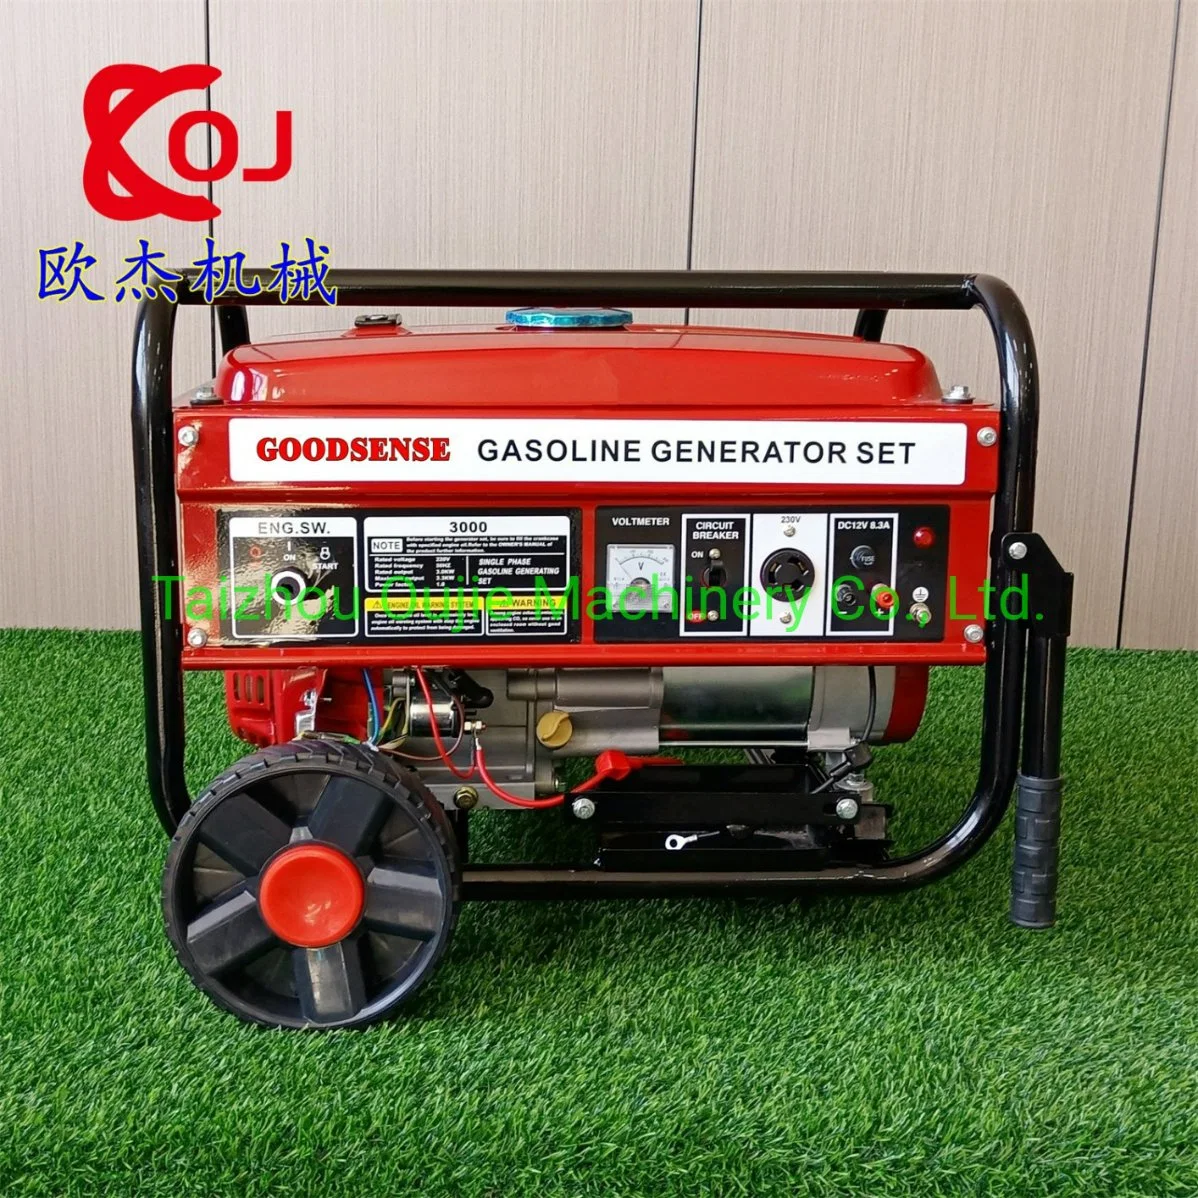 Goodsense Brand Small Generator 220V Household Quiet Fuel Saving 5500W Gasoline Emergency Liquefied Gas with Wheel Single Phase